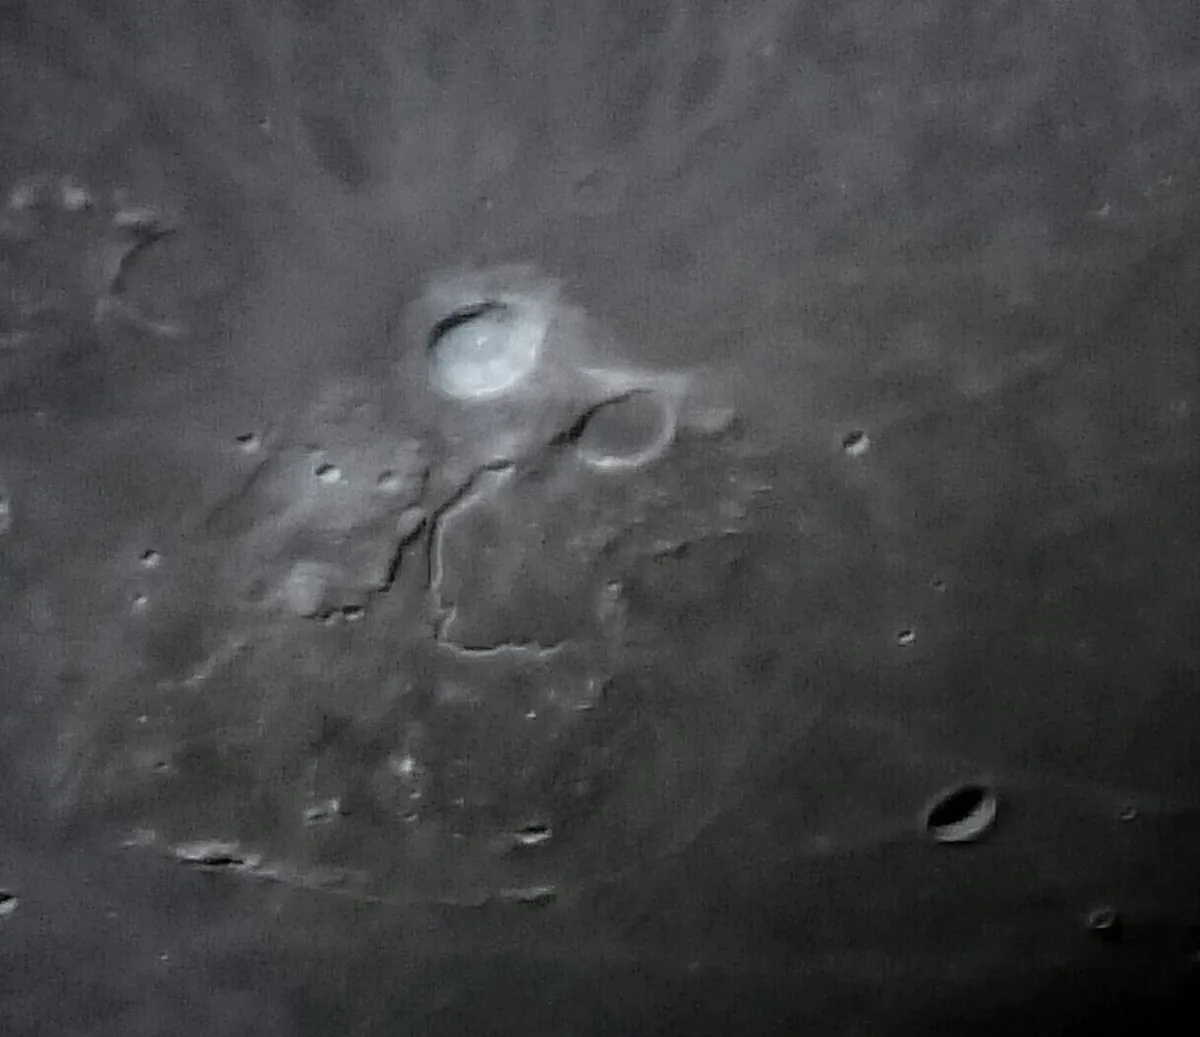 Smartphone telescope adapters help you get closer to your target and capture it on your phone's camera, like this image of Schroter's Valley on the Moon by Julie Straayer, Albany Creek, Australia.